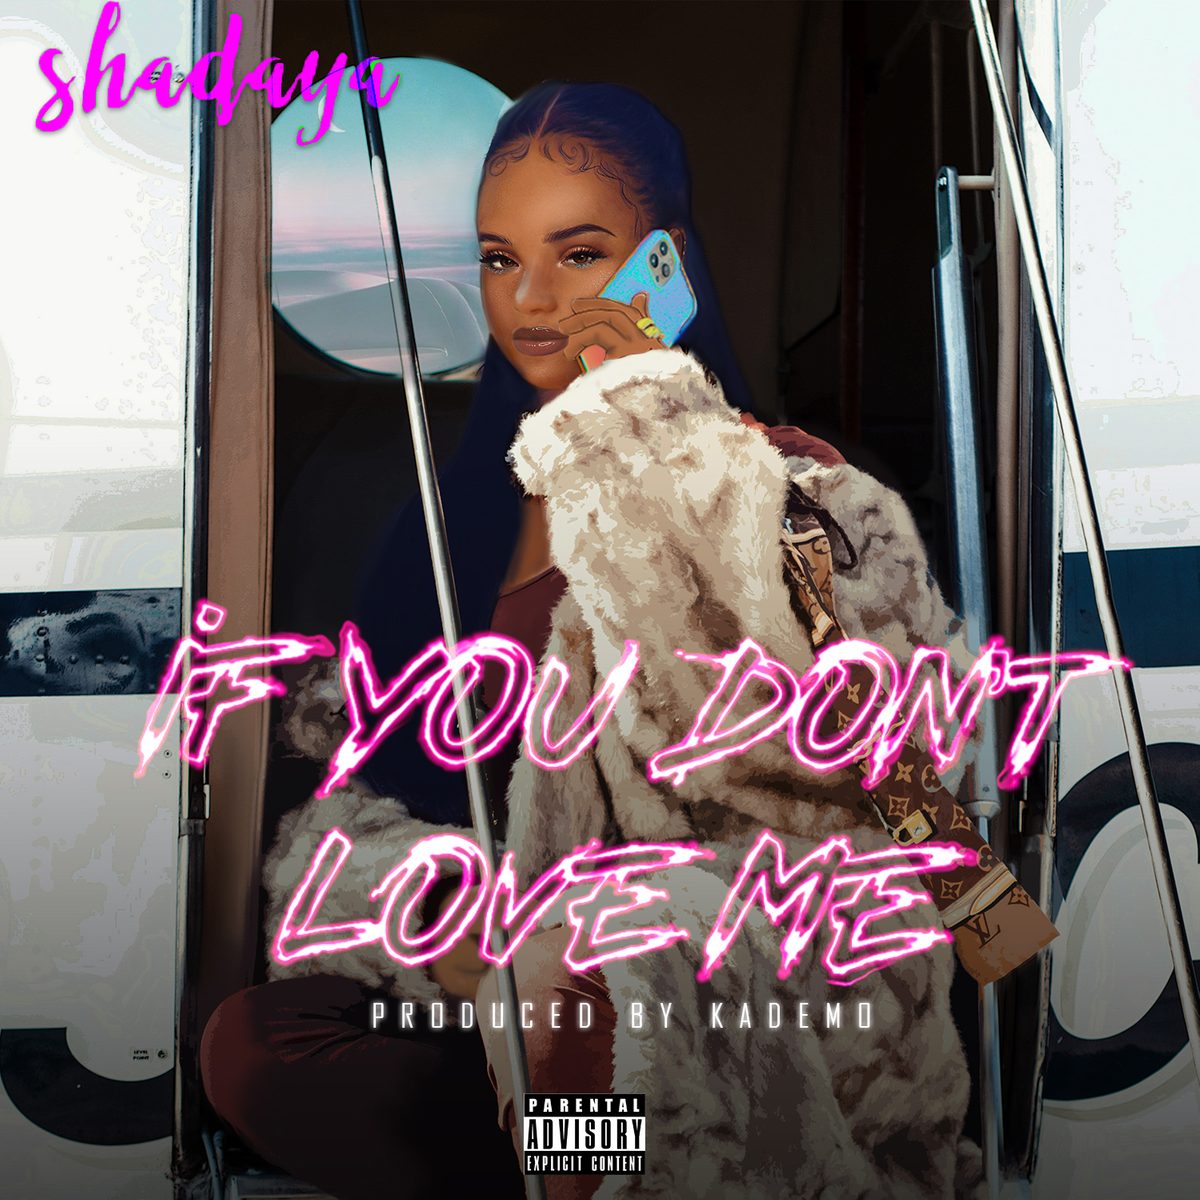 Shadaya - If You Don't Love Me